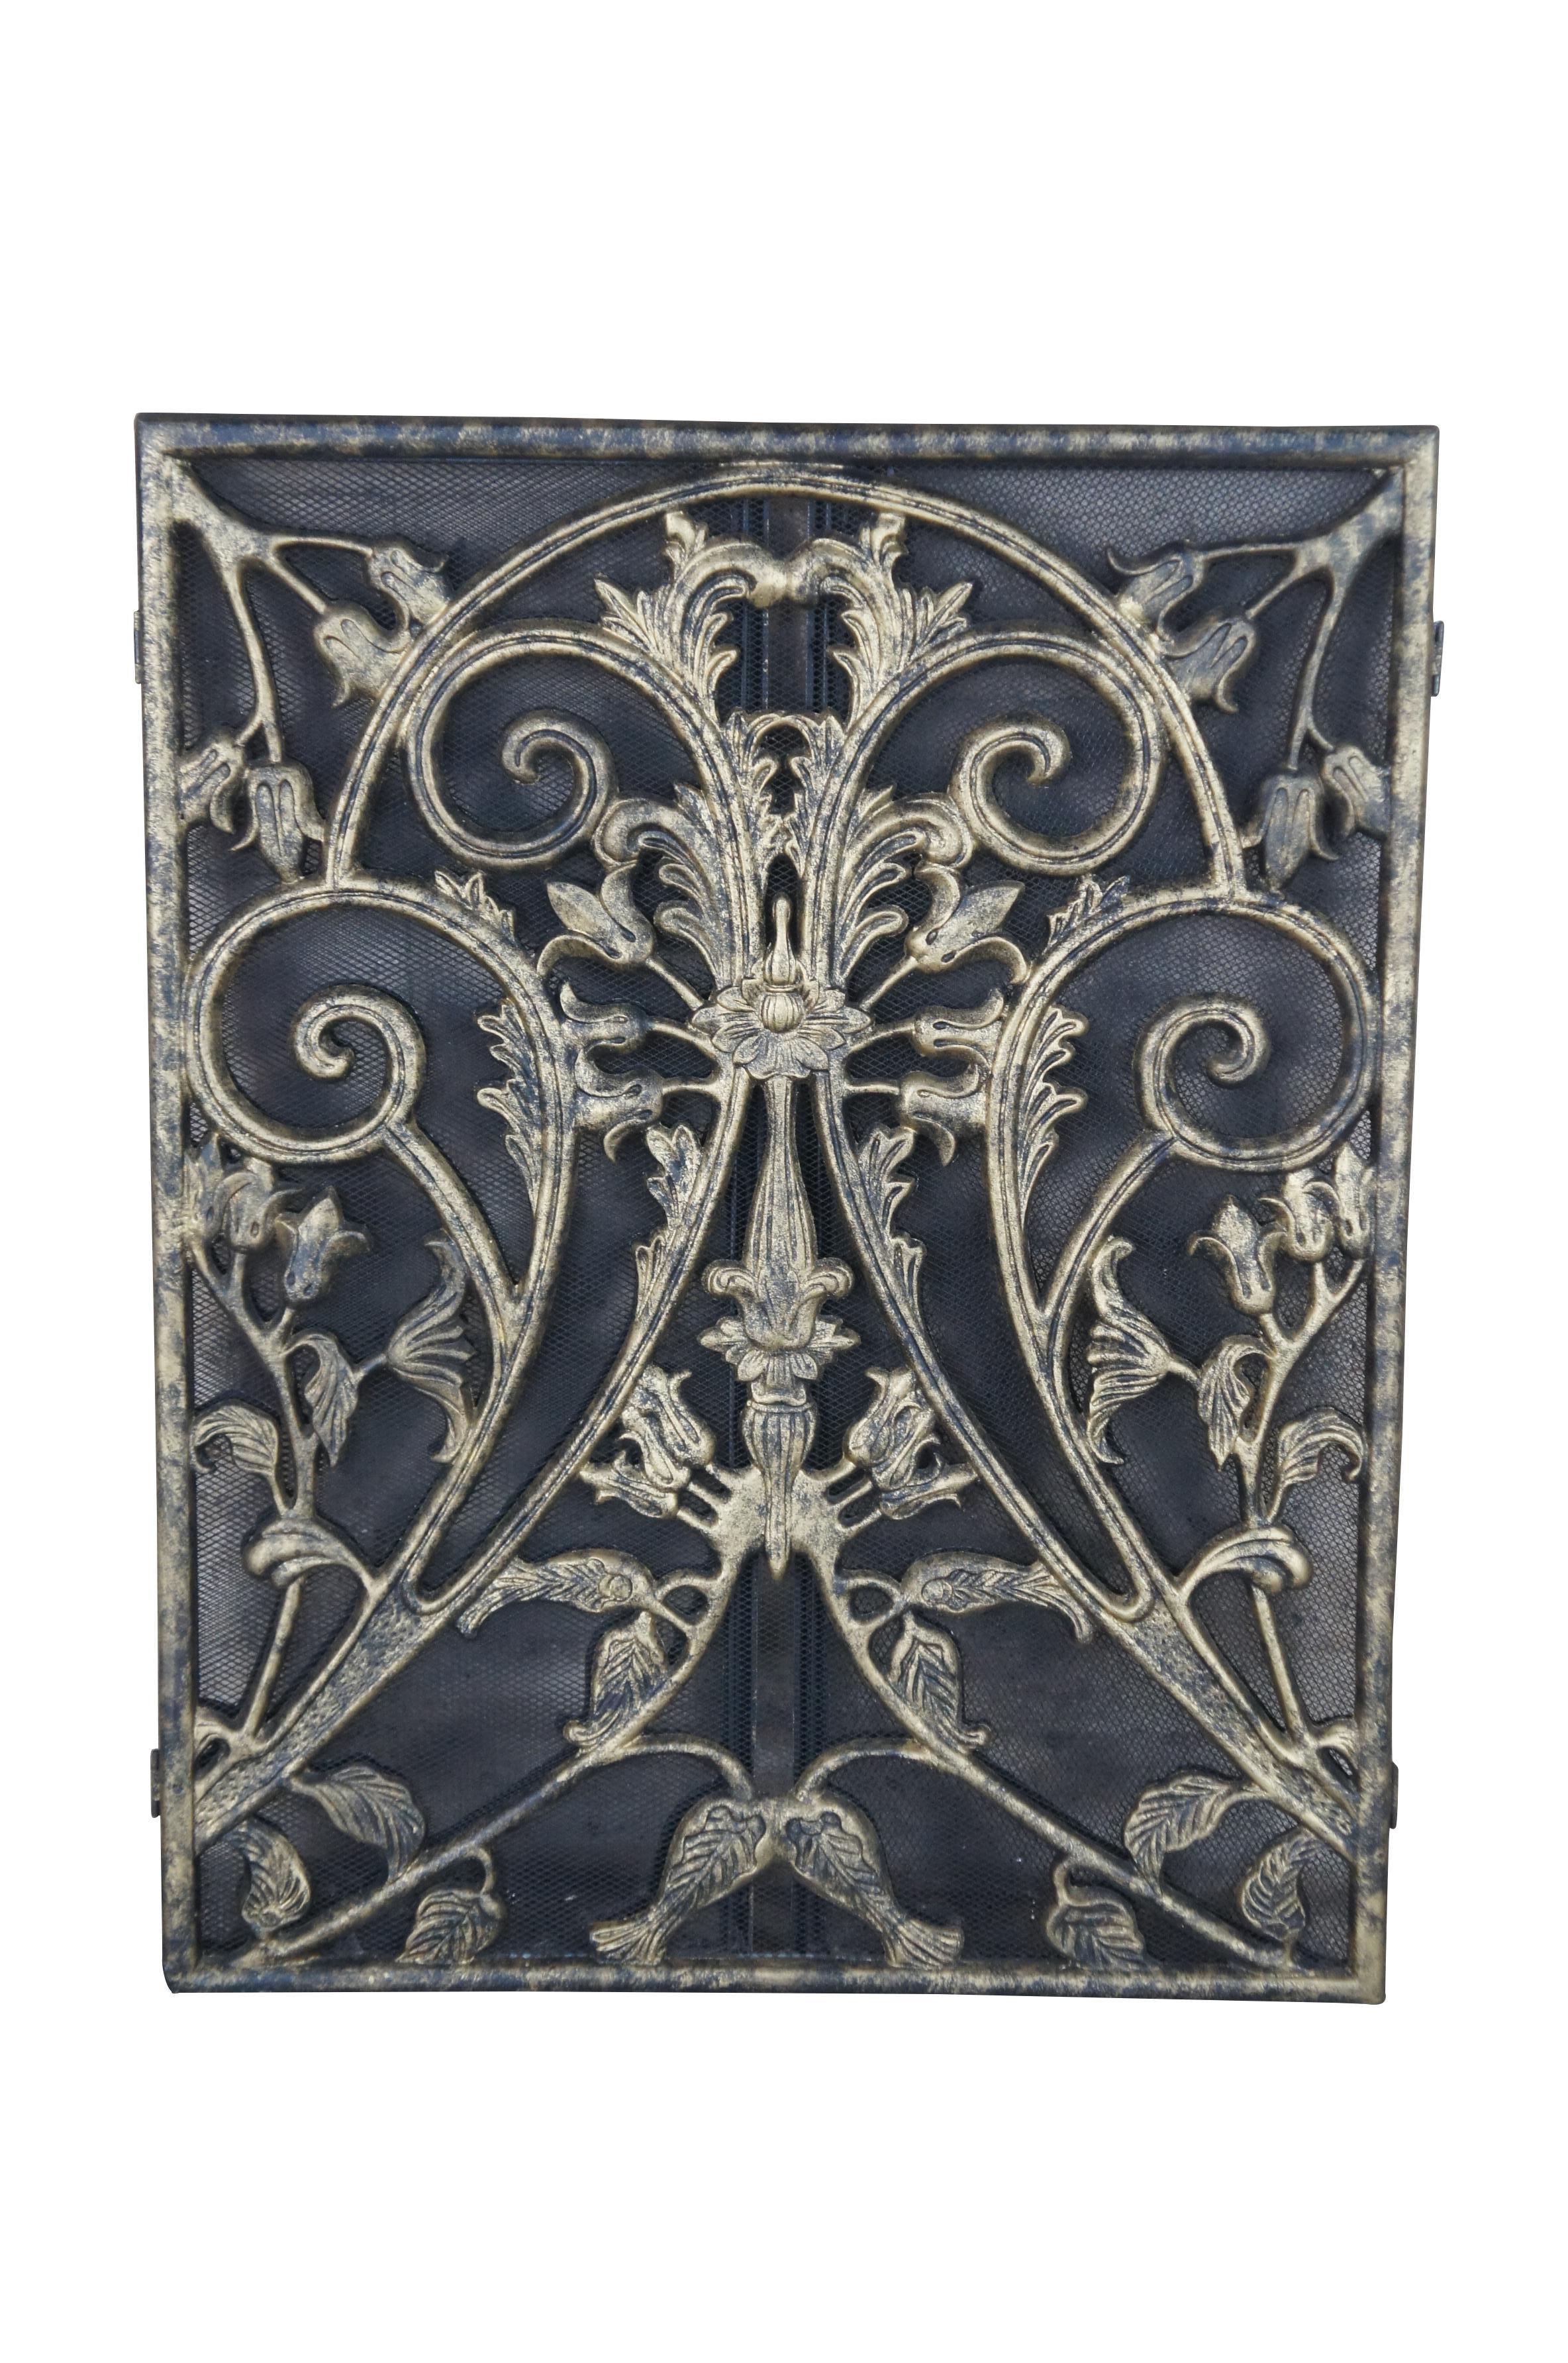 Neoclassical Revival Brass Mesh 3 Panel Floral Acanthus Fireplace Folding Fire Screen Hearthware 55